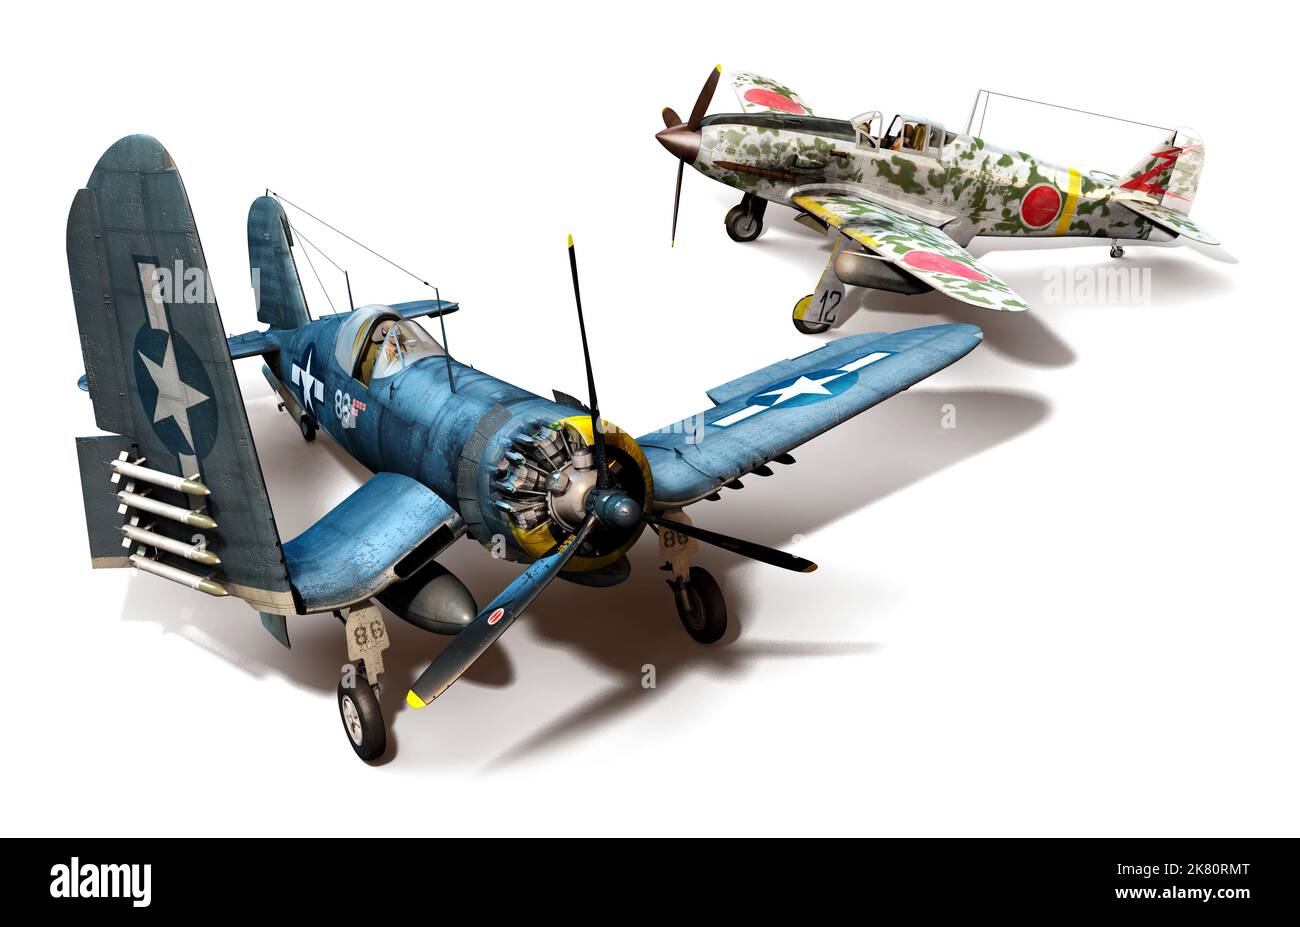 Comparison of two fighter planes, American F4U Corsair and a Japanese Ki-61 Hien. Stock Photo